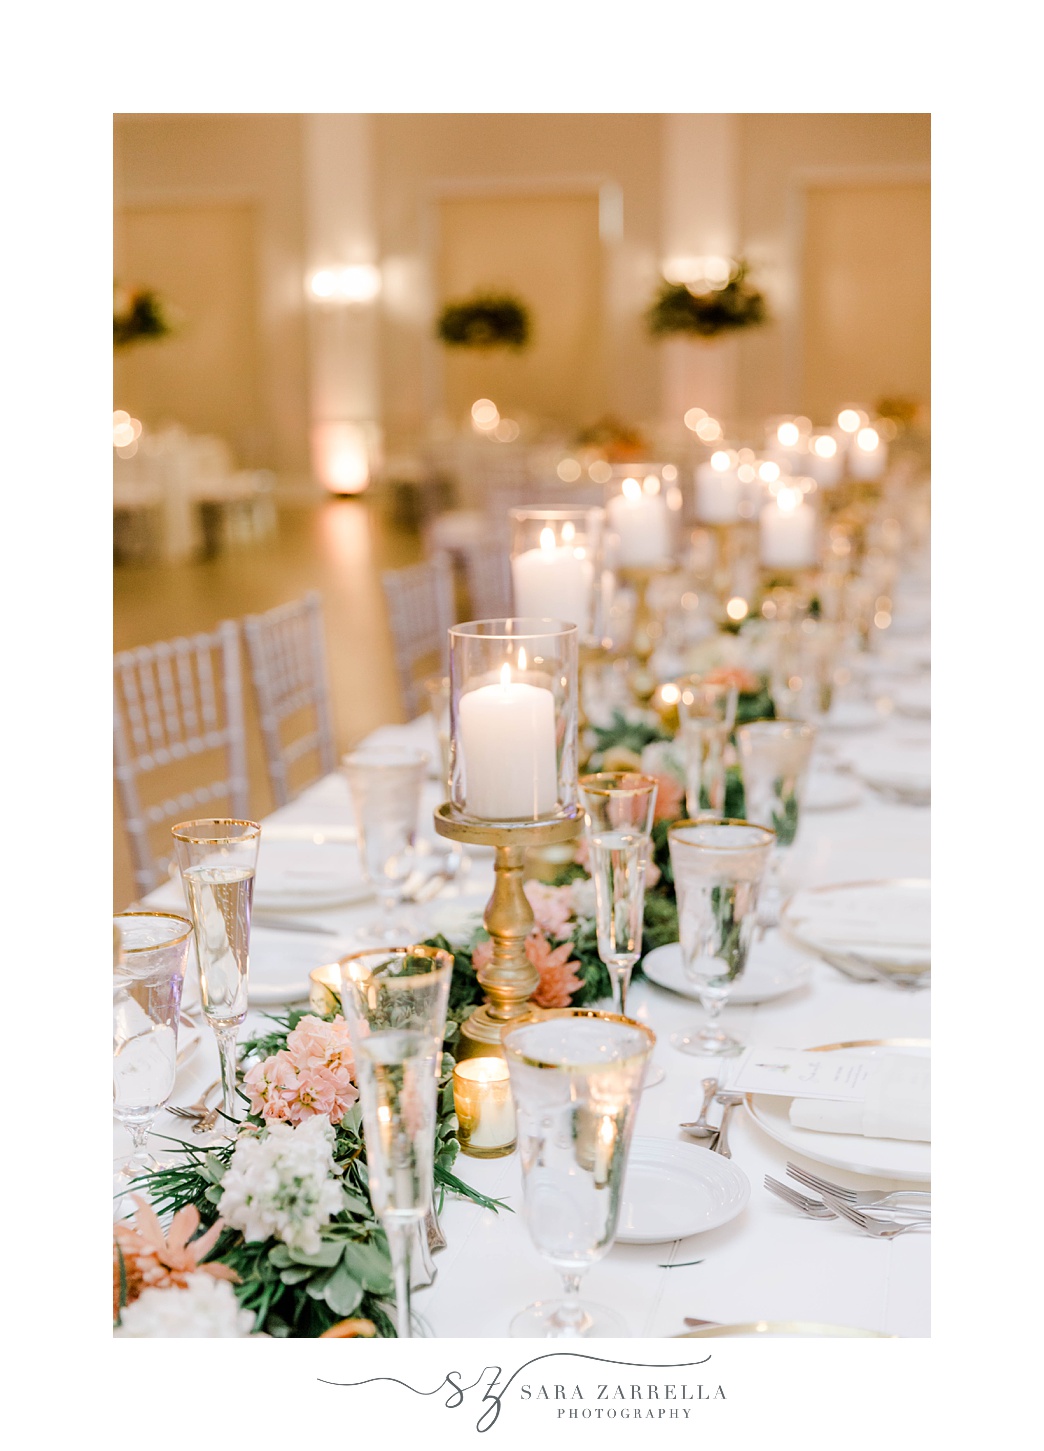 gold candle holders line table at Newport Harbor Island Resort